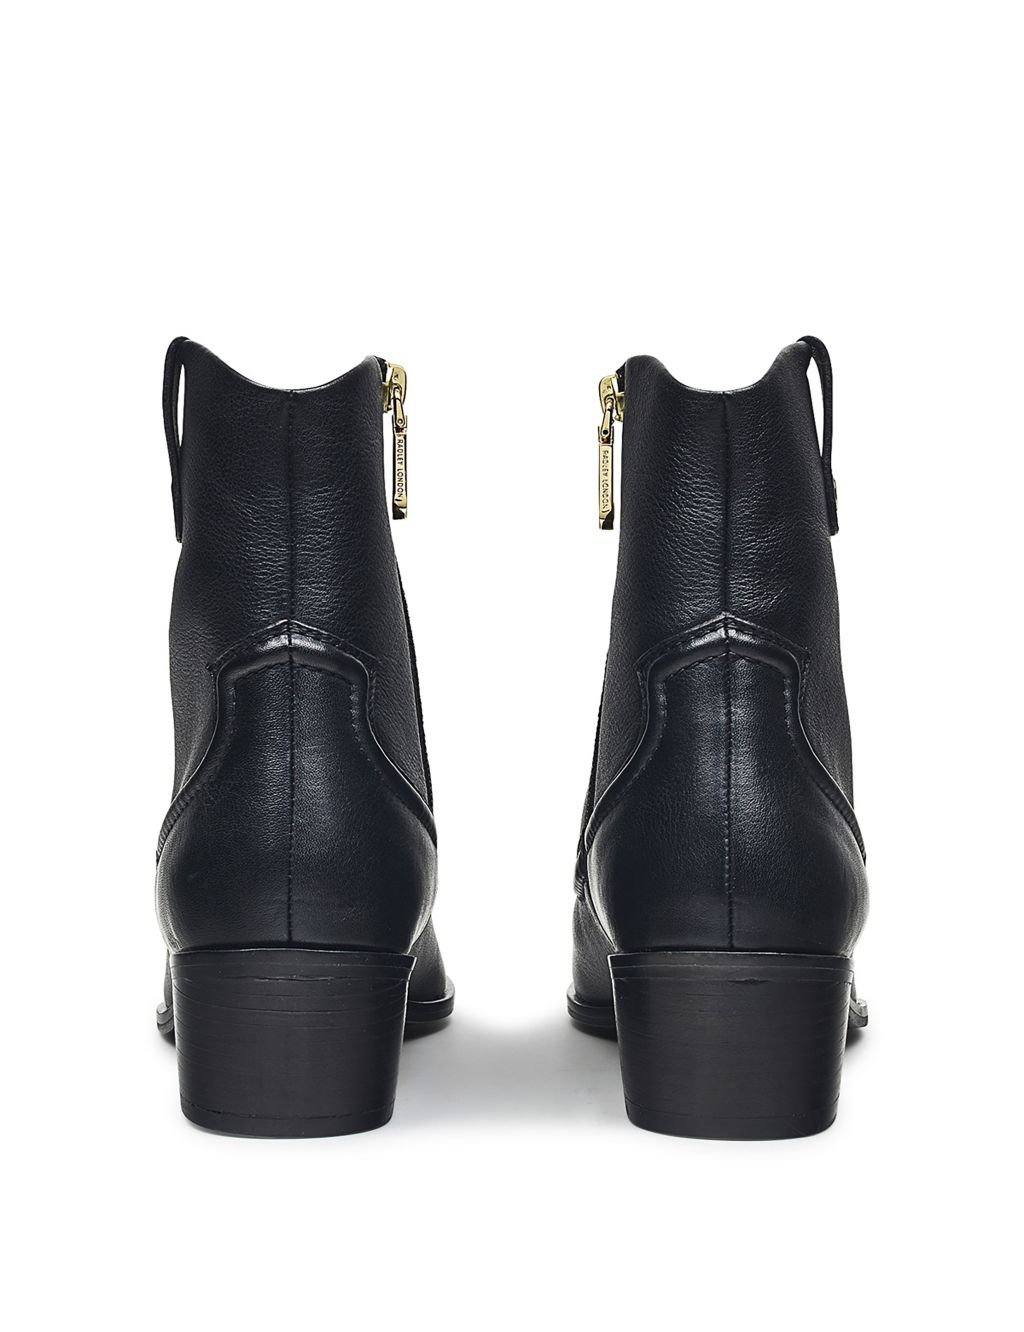 Leather Block Heel Ankle Boots image 4